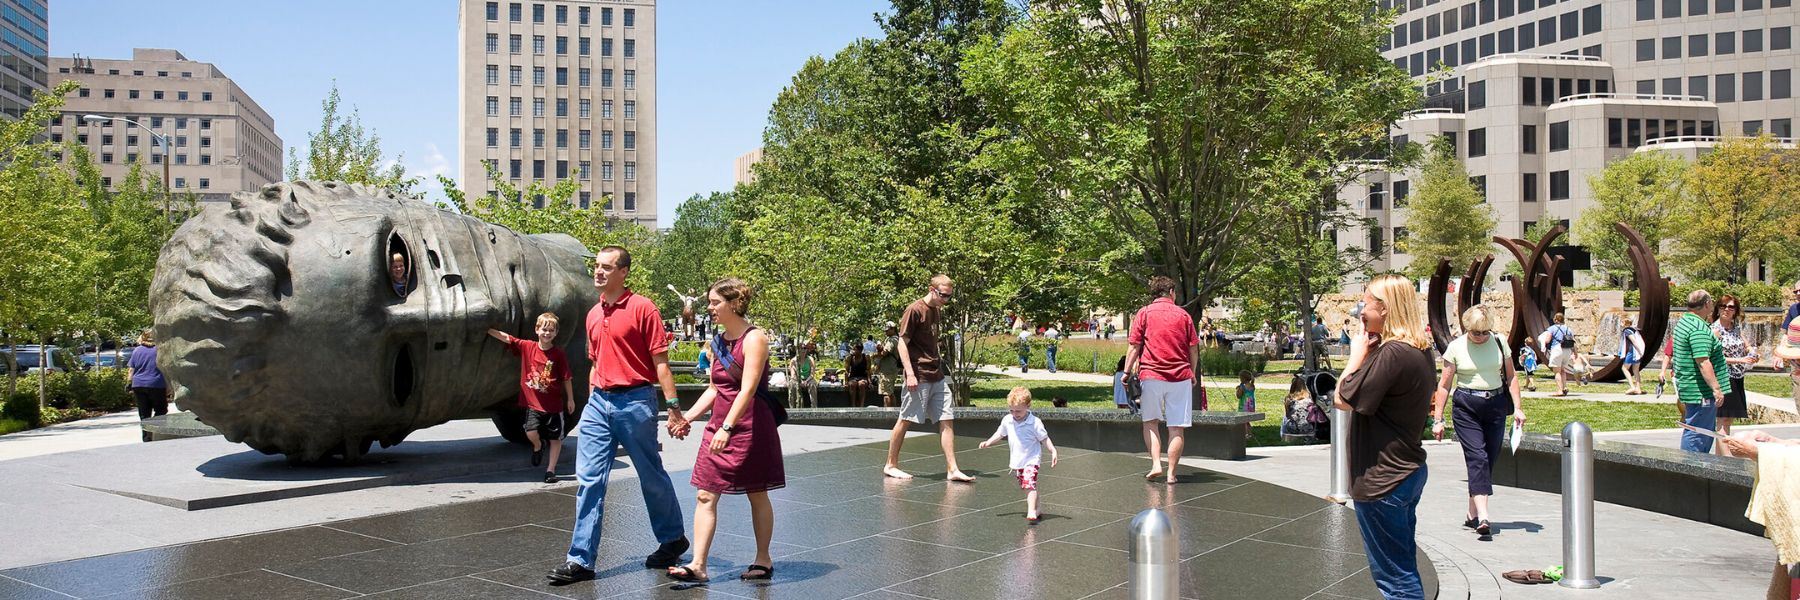 Family fun happens at Citygarden in downtown St. Louis.